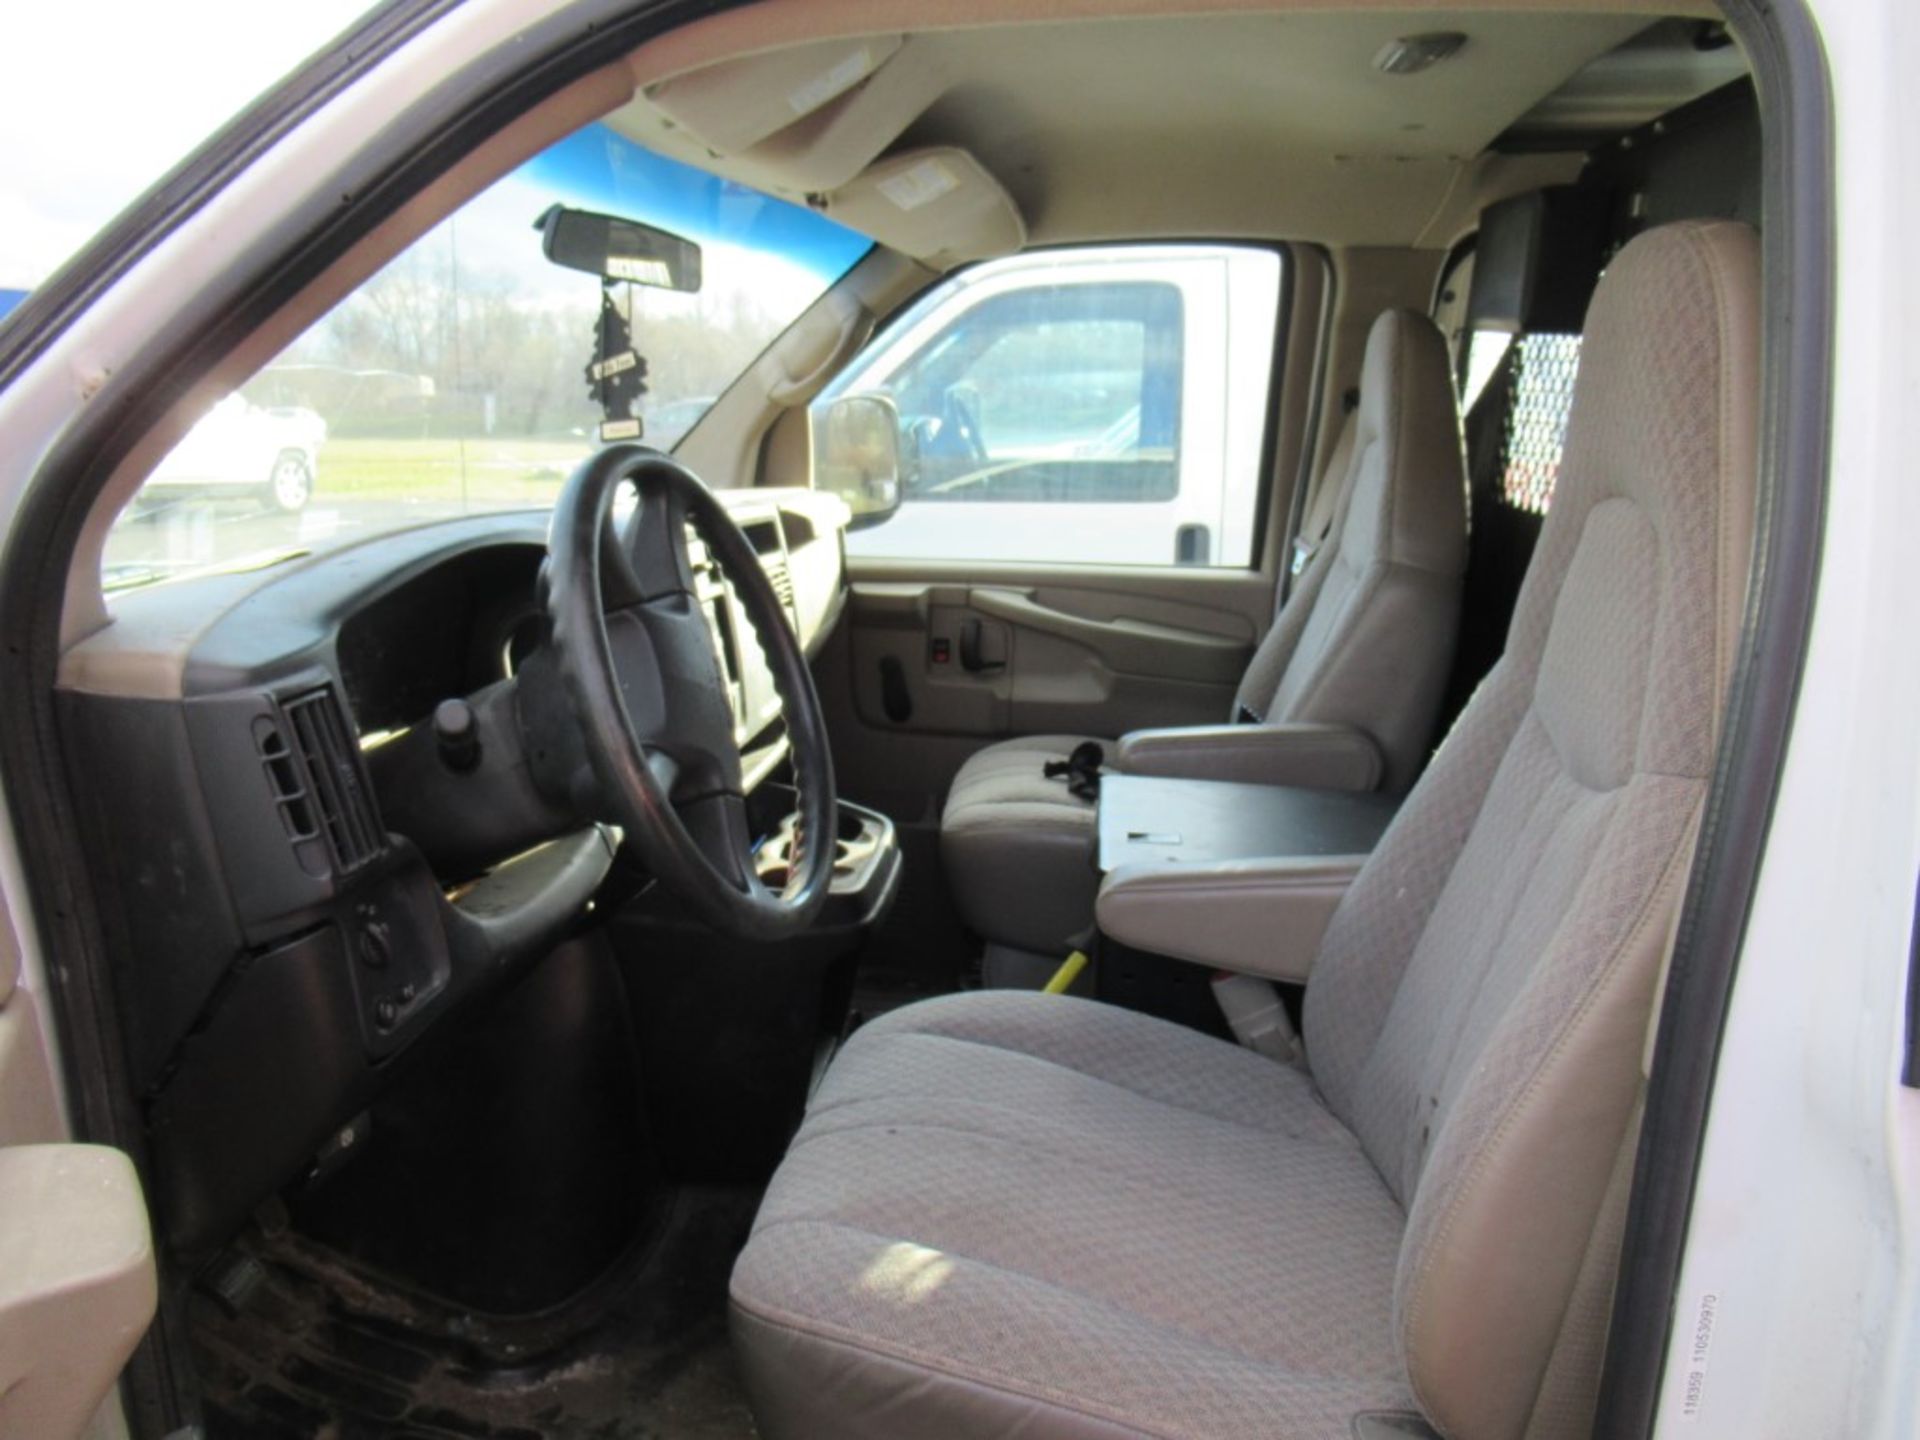 2005 Chevrolet Express Cargo Van, VIN 1GCFG15X651257294, Automatic, AC, AM/FM, Towing, Cracked - Image 26 of 33